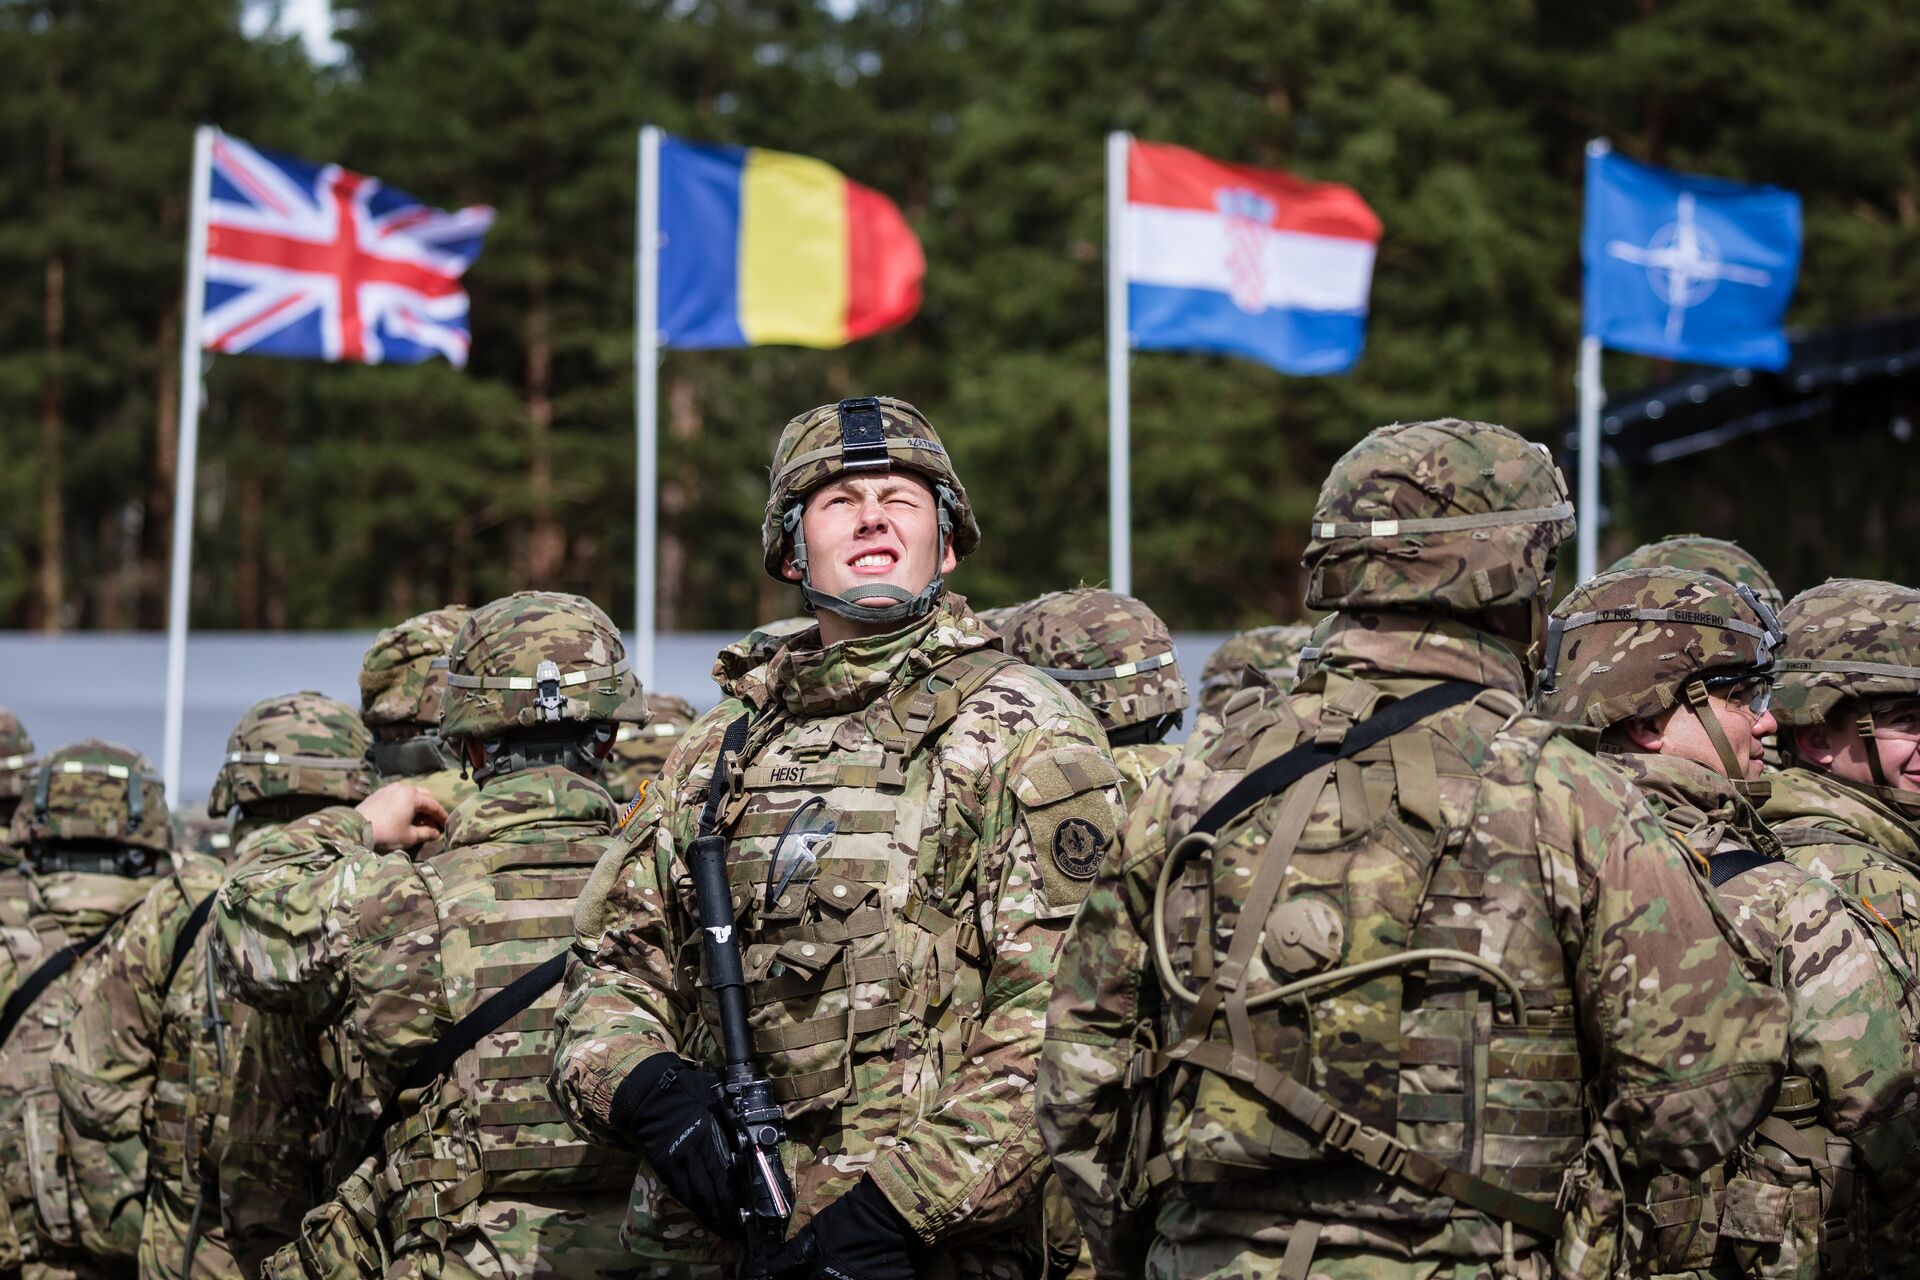 US soldiers are pictured prior the beginning of the official welcoming ceremony of NATO troops in Orzysz, Poland, on April 13, 2017. - Sputnik International, 1920, 22.01.2022